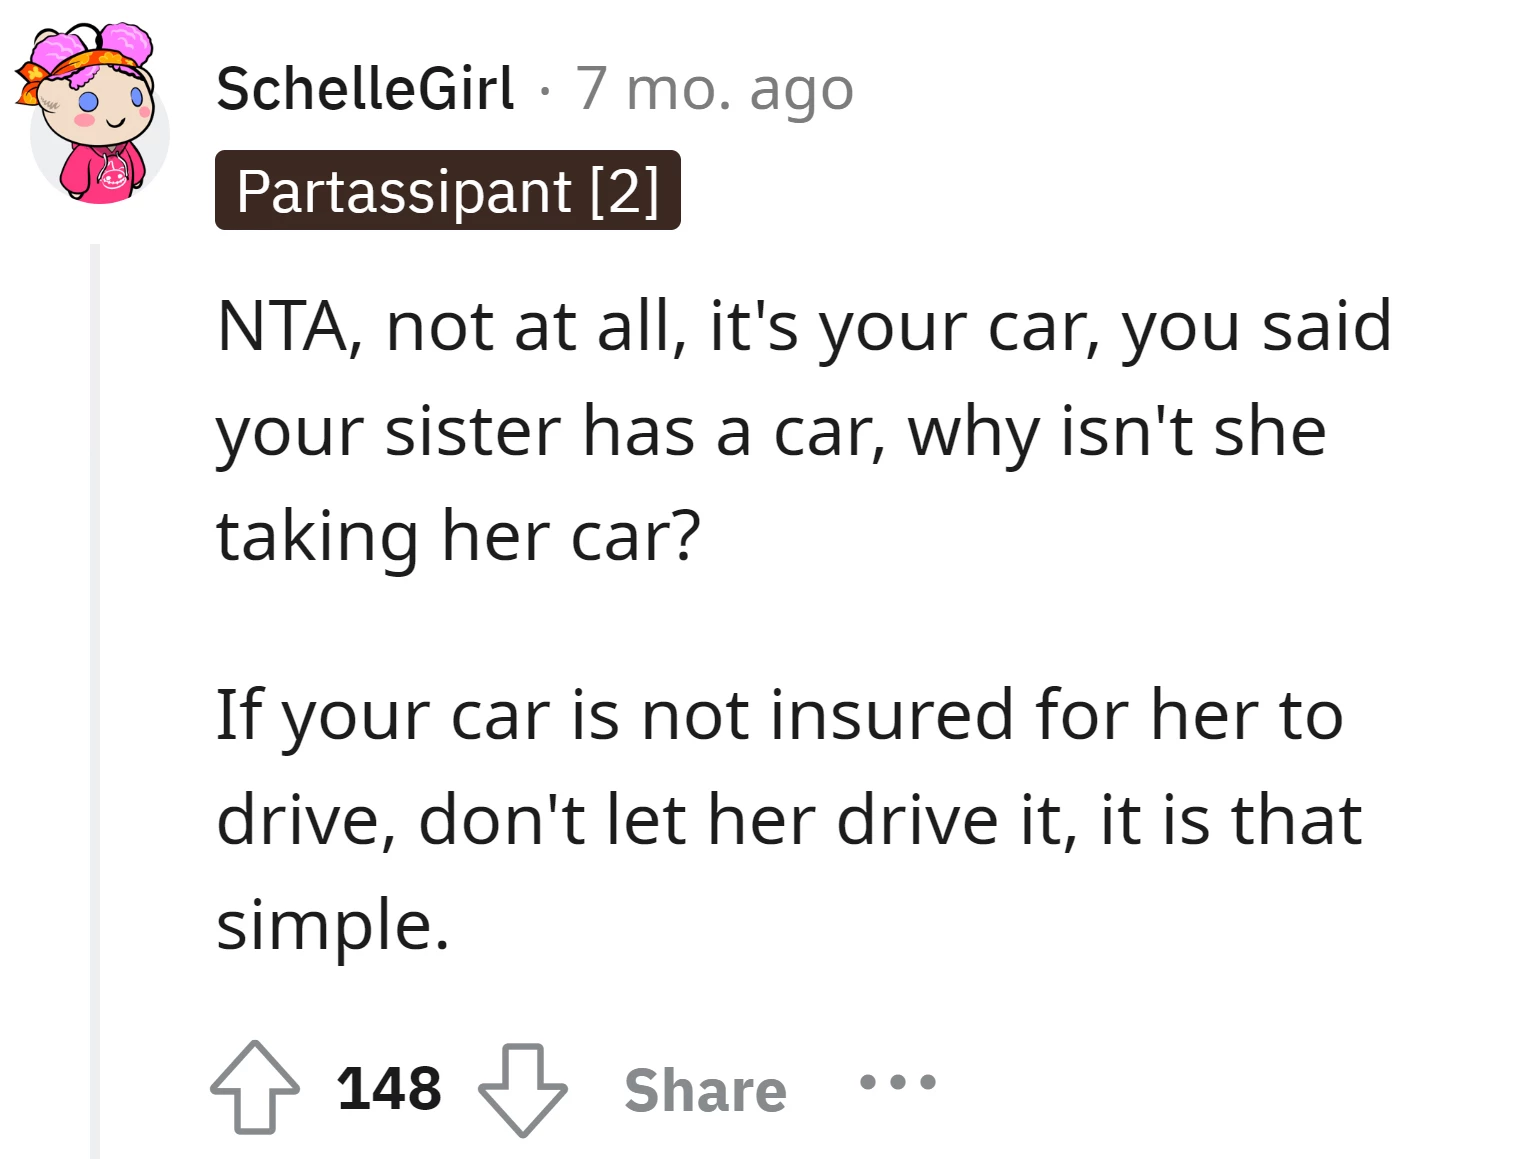 Why the sister doesn't use her own car for the road trip